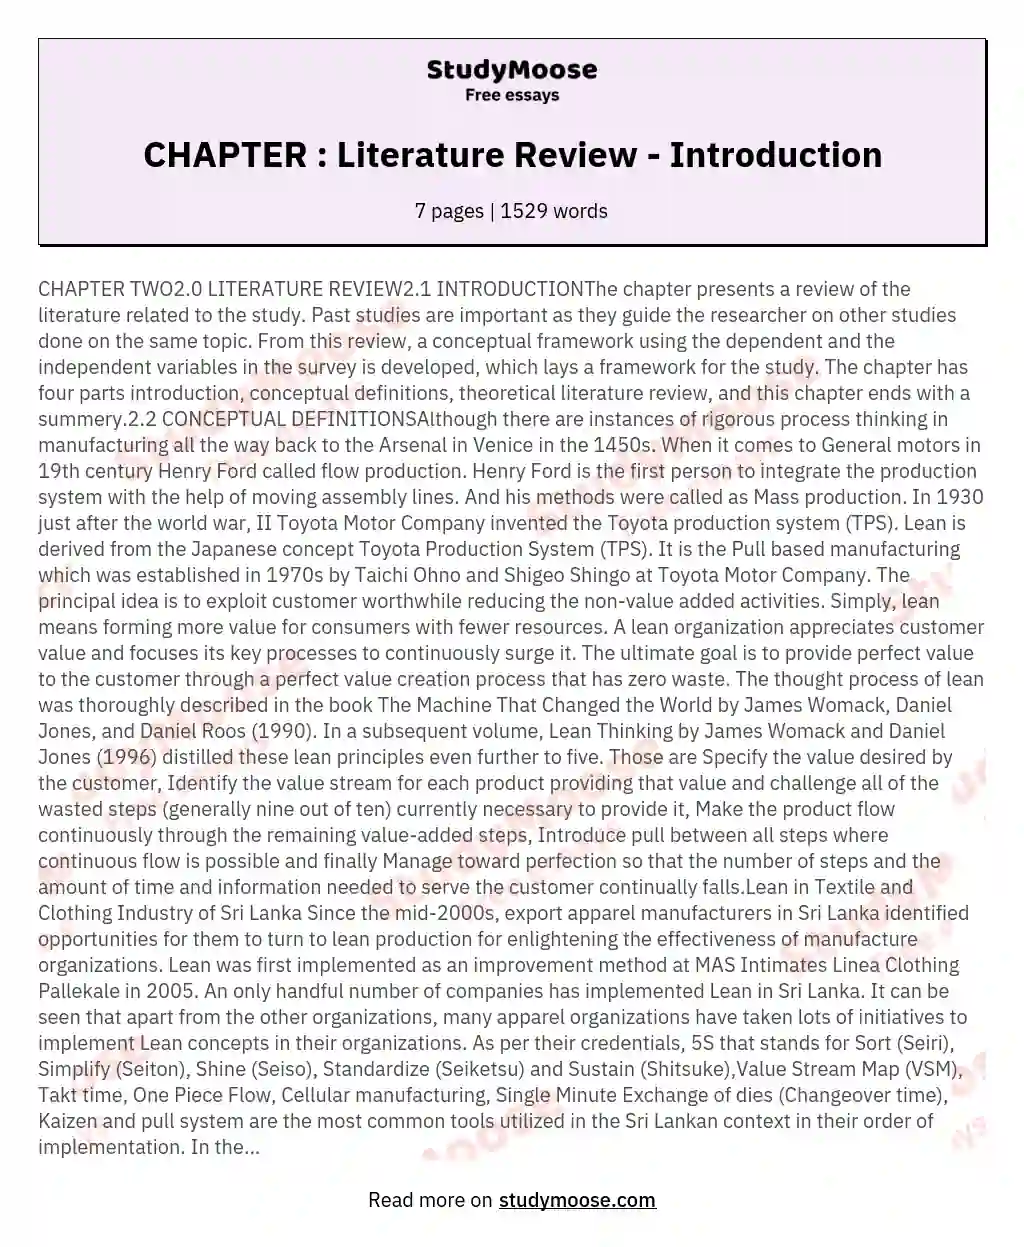 CHAPTER TWO20 LITERATURE REVIEW21 INTRODUCTIONThe chapter presents a review of the literature